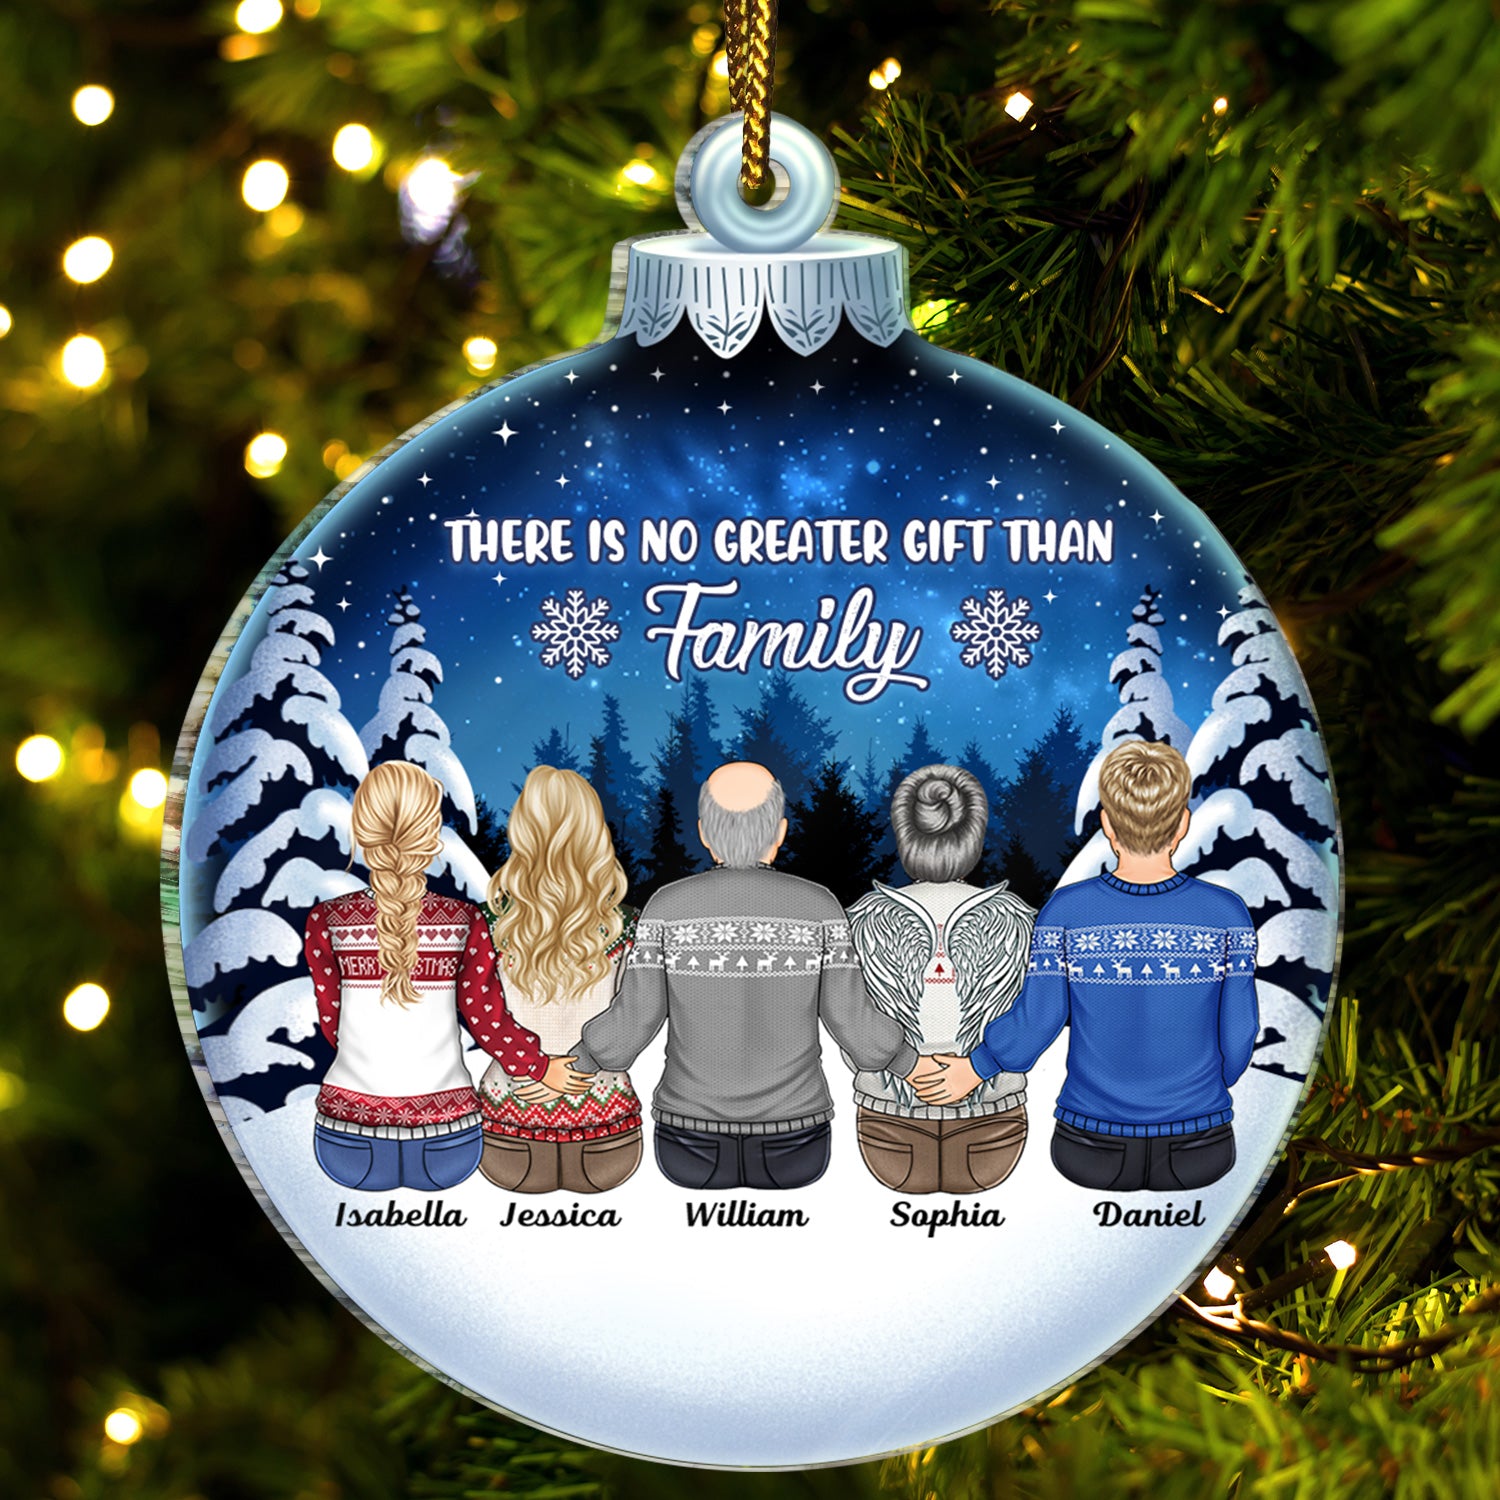 There Is No Greater Gift Than Family - Christmas Memorial Gift For Siblings, Family - Personalized Custom Shaped Acrylic Ornament